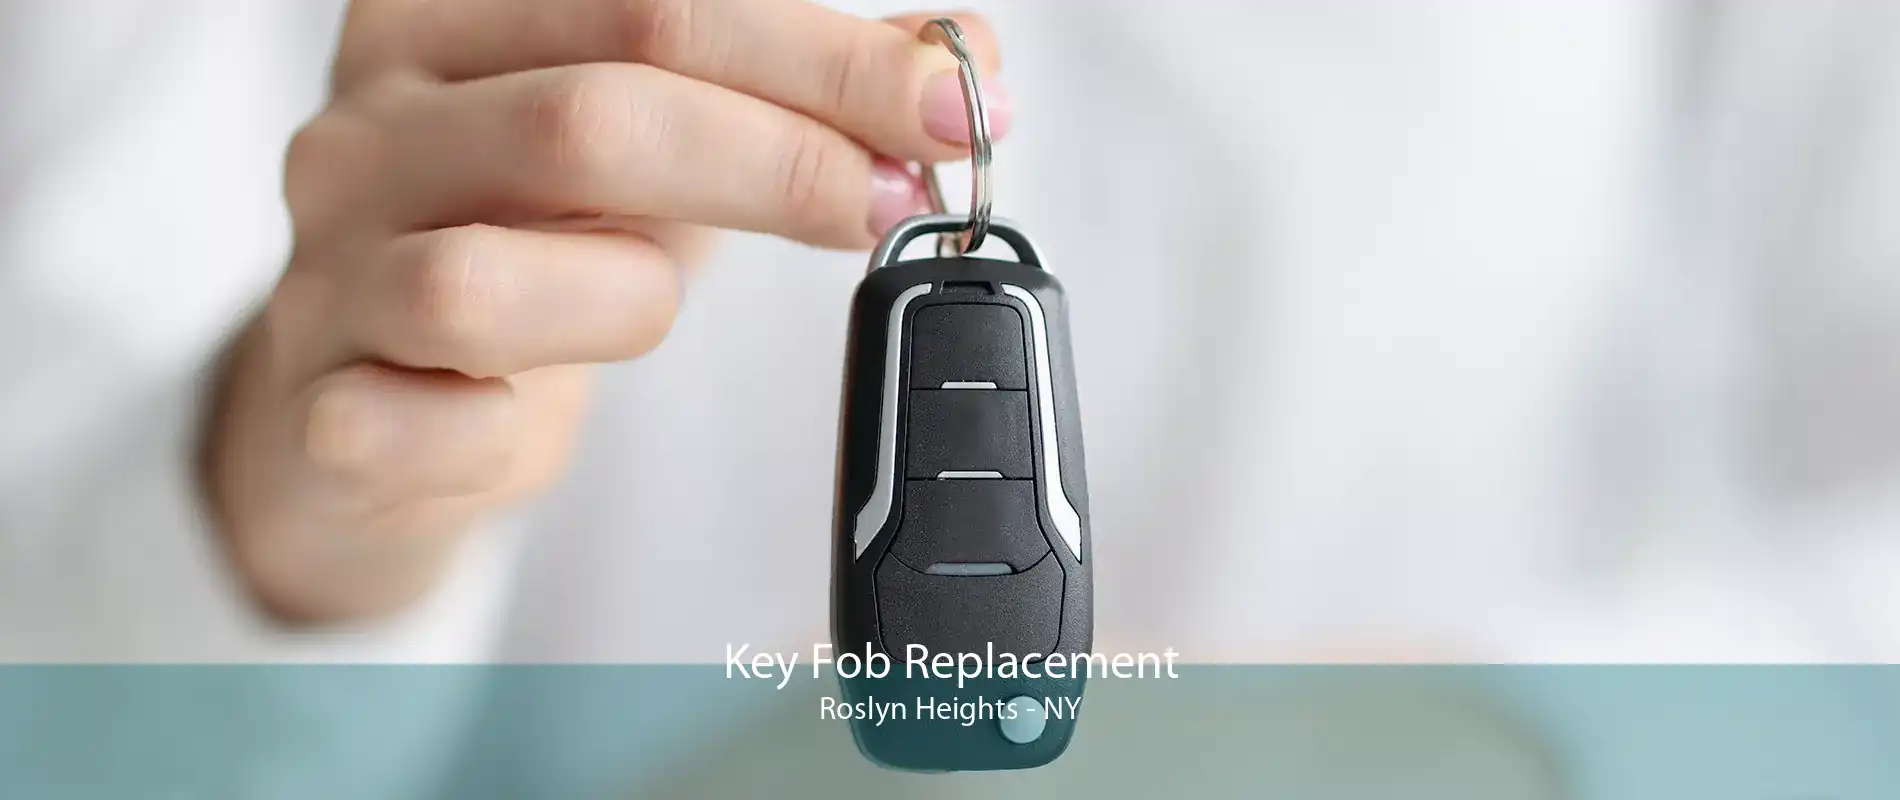 Key Fob Replacement Roslyn Heights - NY